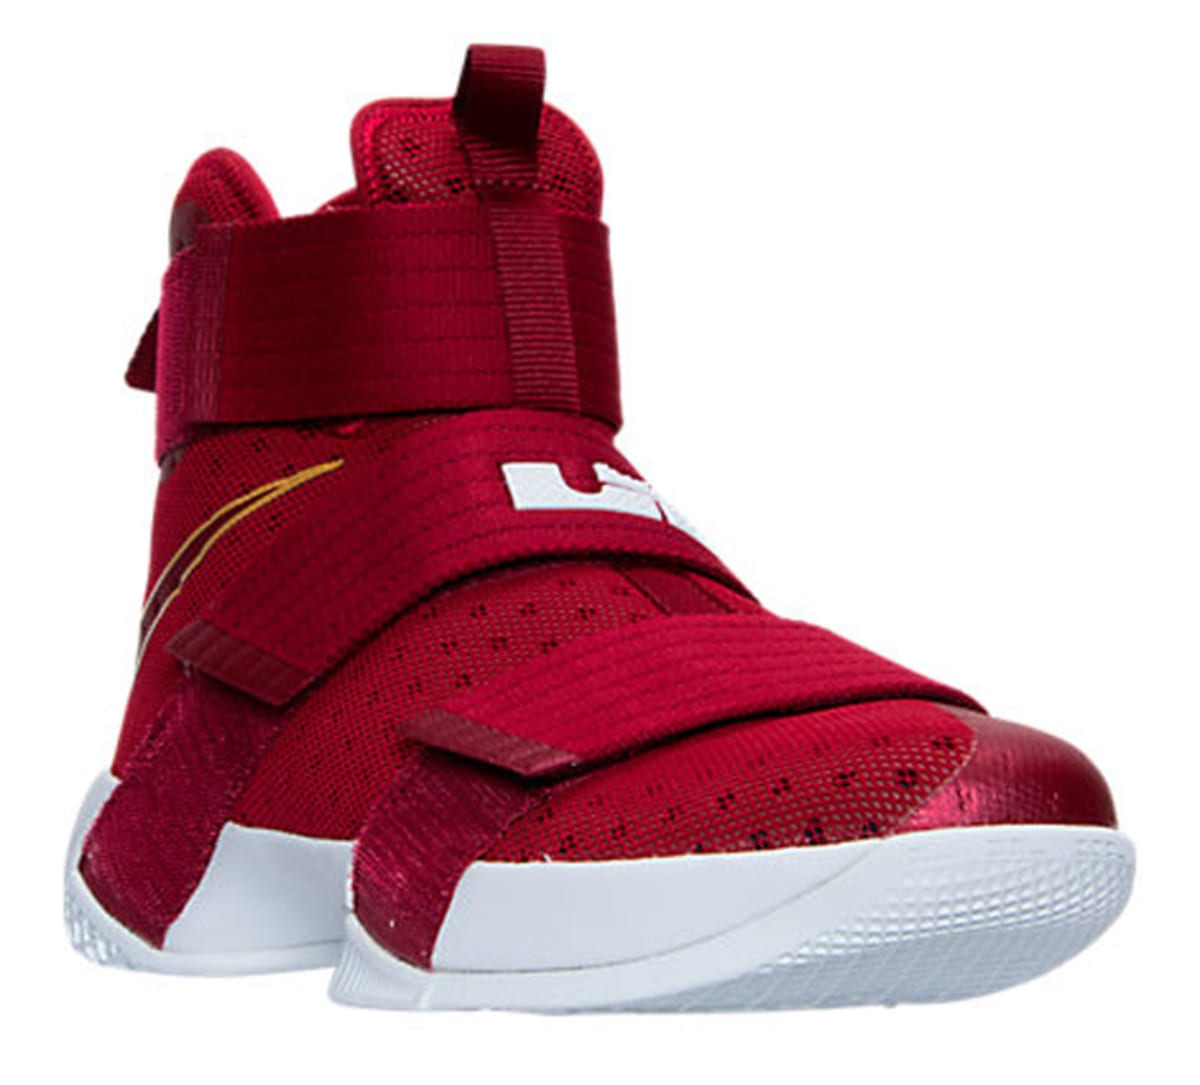 Nike LeBron Soldier 10 Christ the King Cavs Team Red Side 844374-668 | Sole Collector